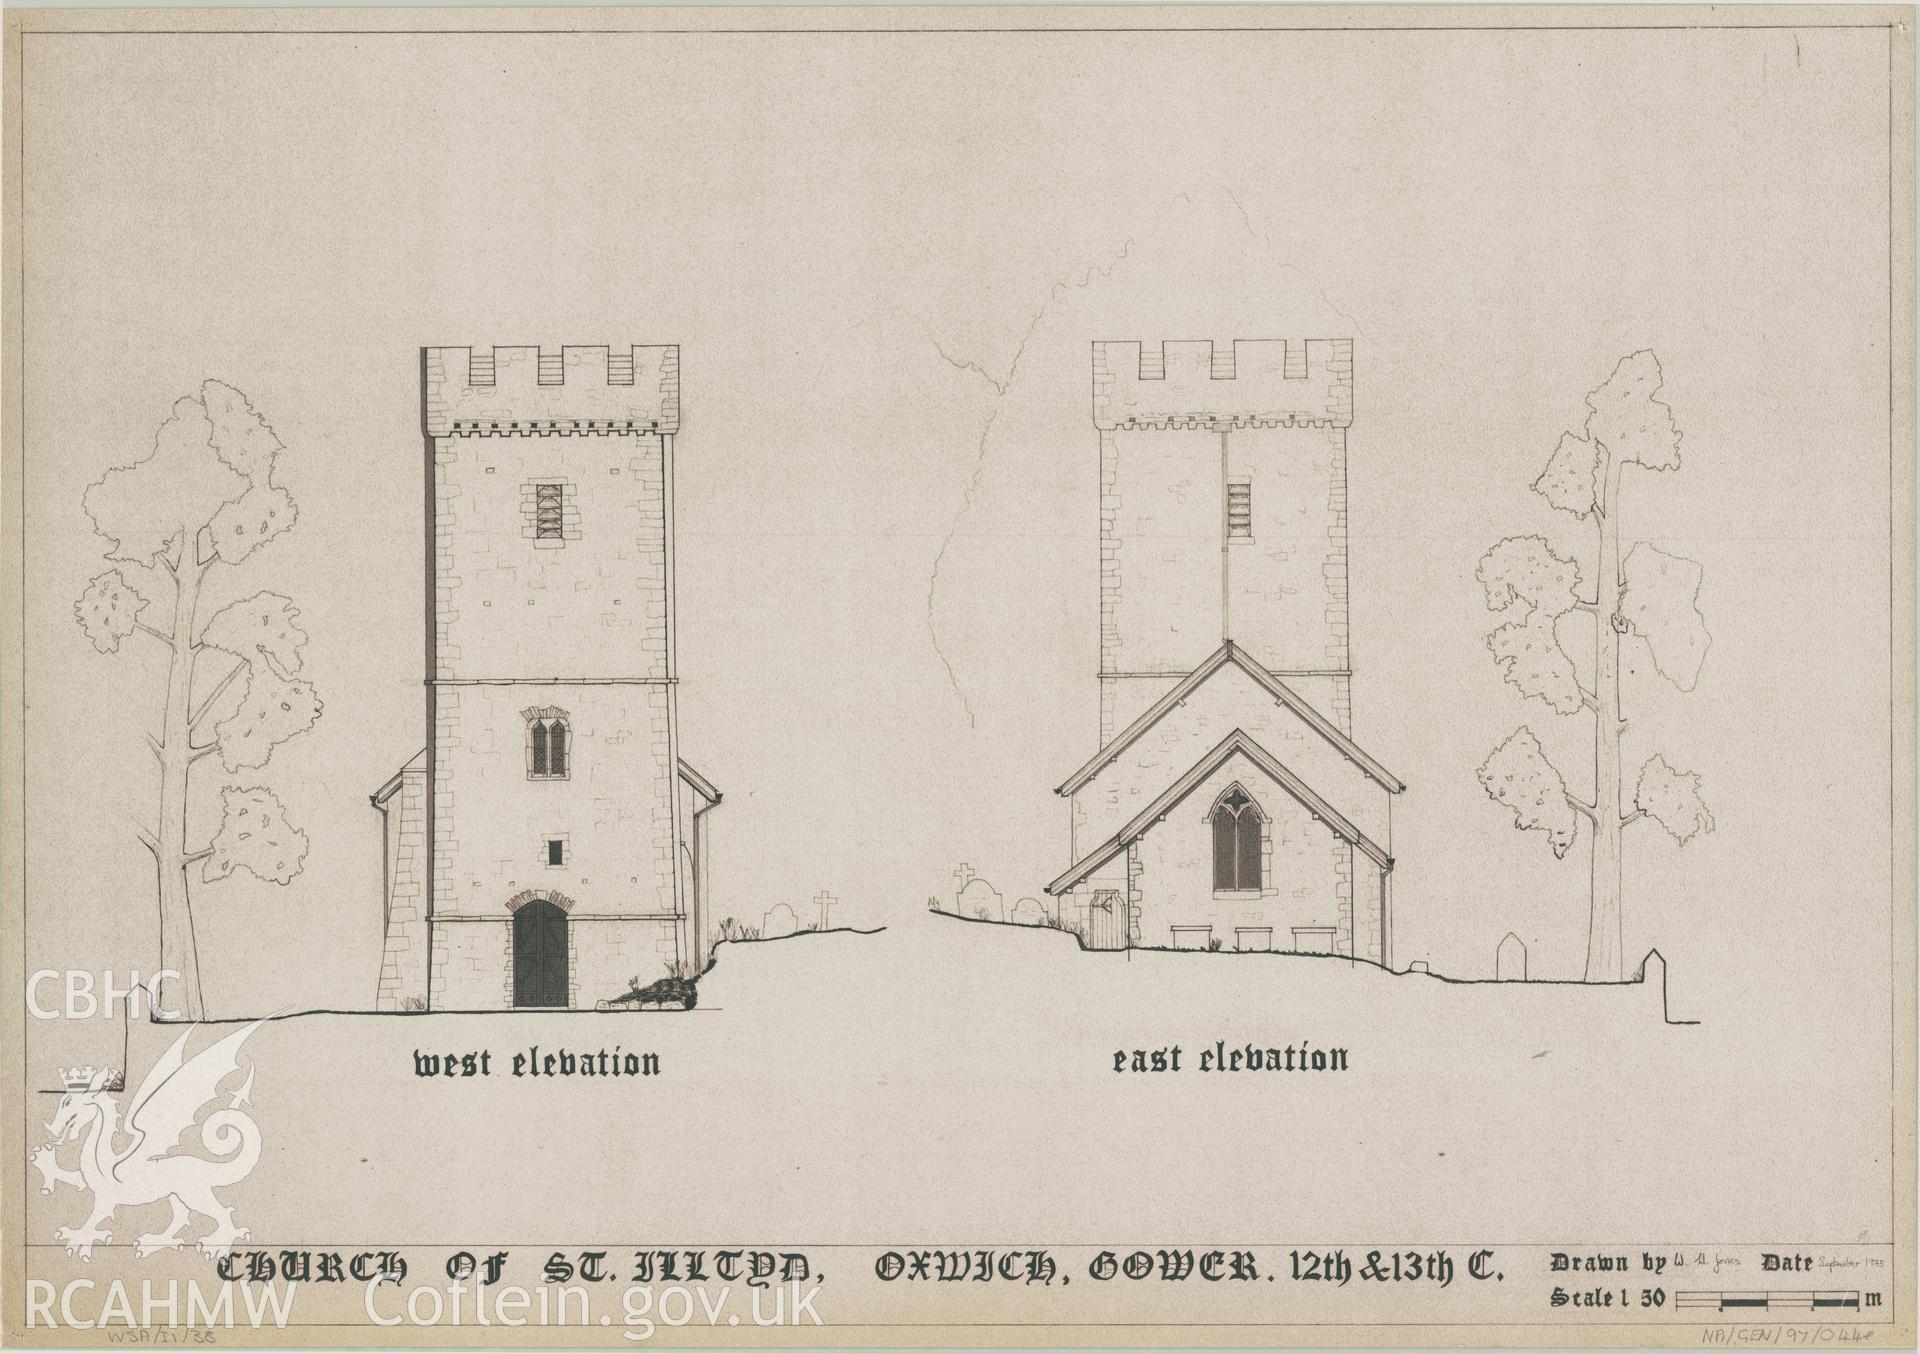 Measured drawing showing west and east elevation of St Illtyd's Church, Oxwich, produced by W.Ll. Jones, September 1975.